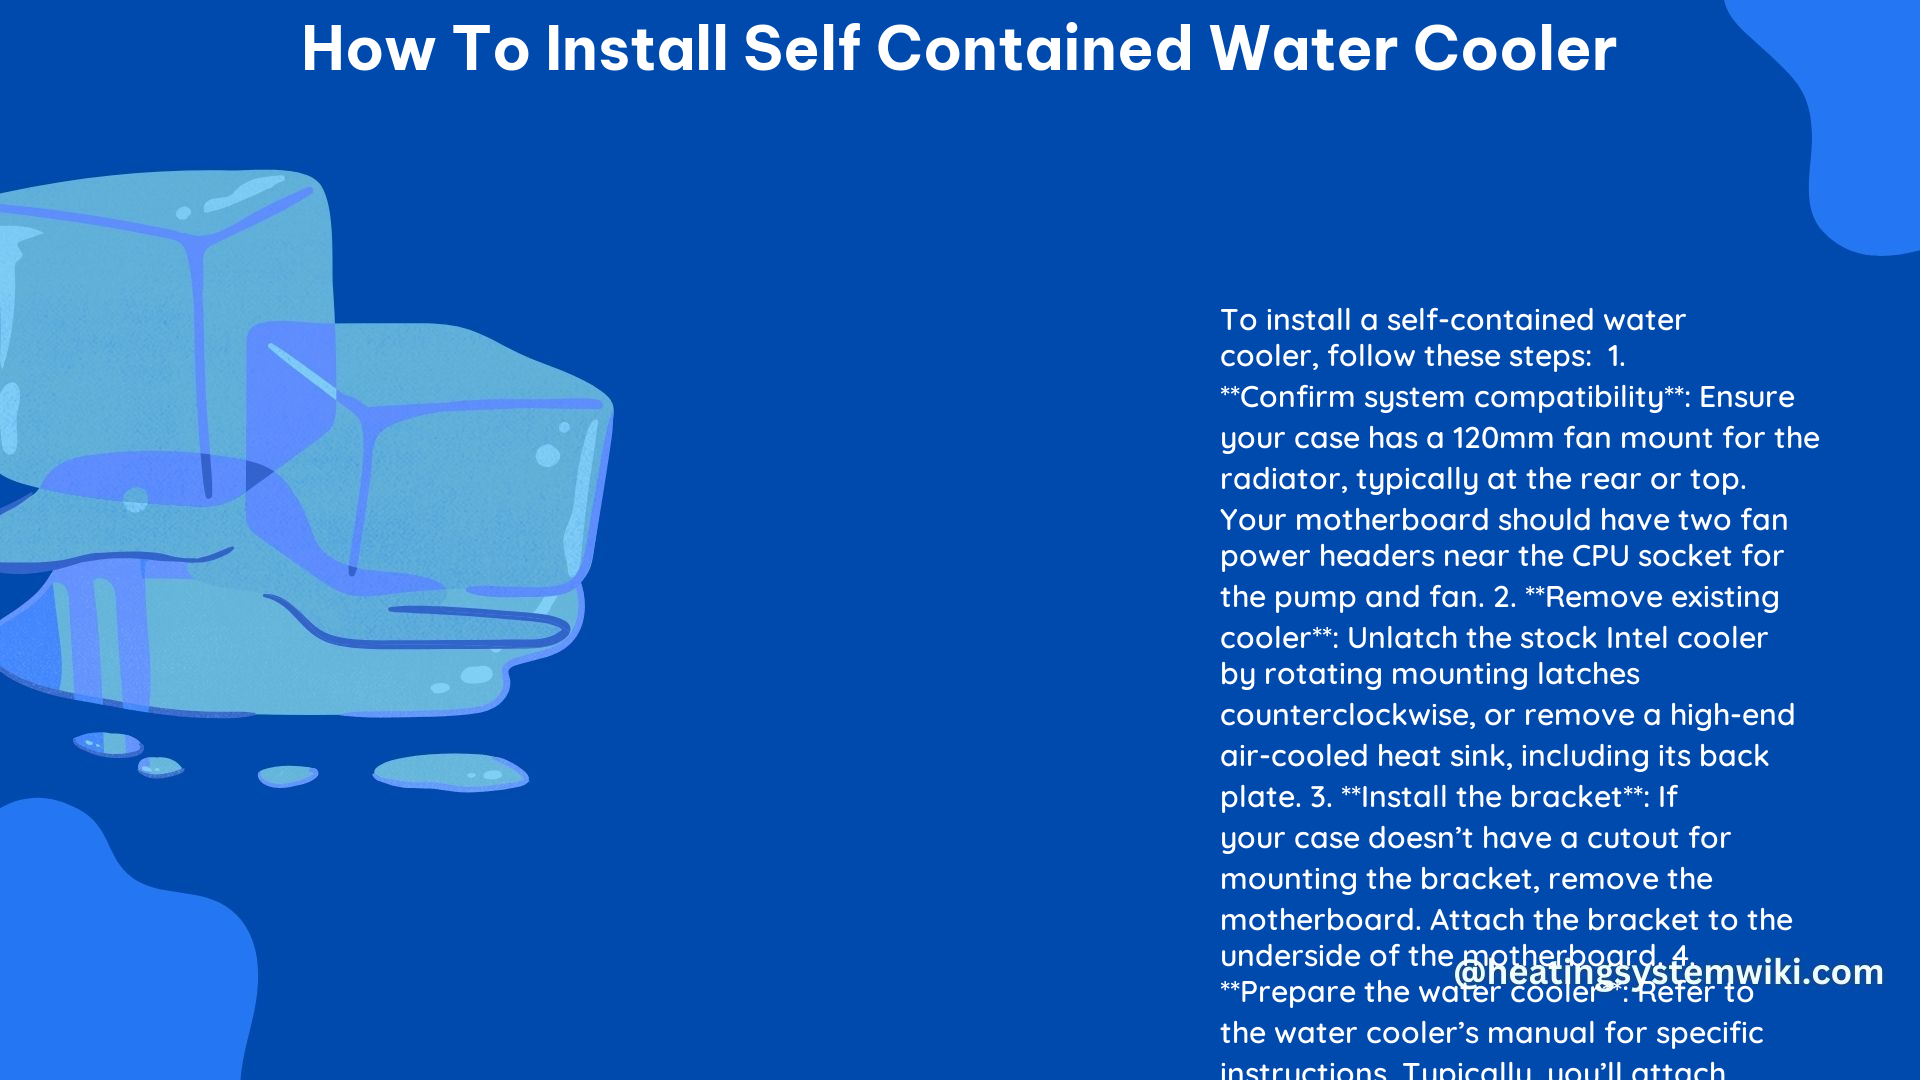 How to Install Self Contained Water Cooler